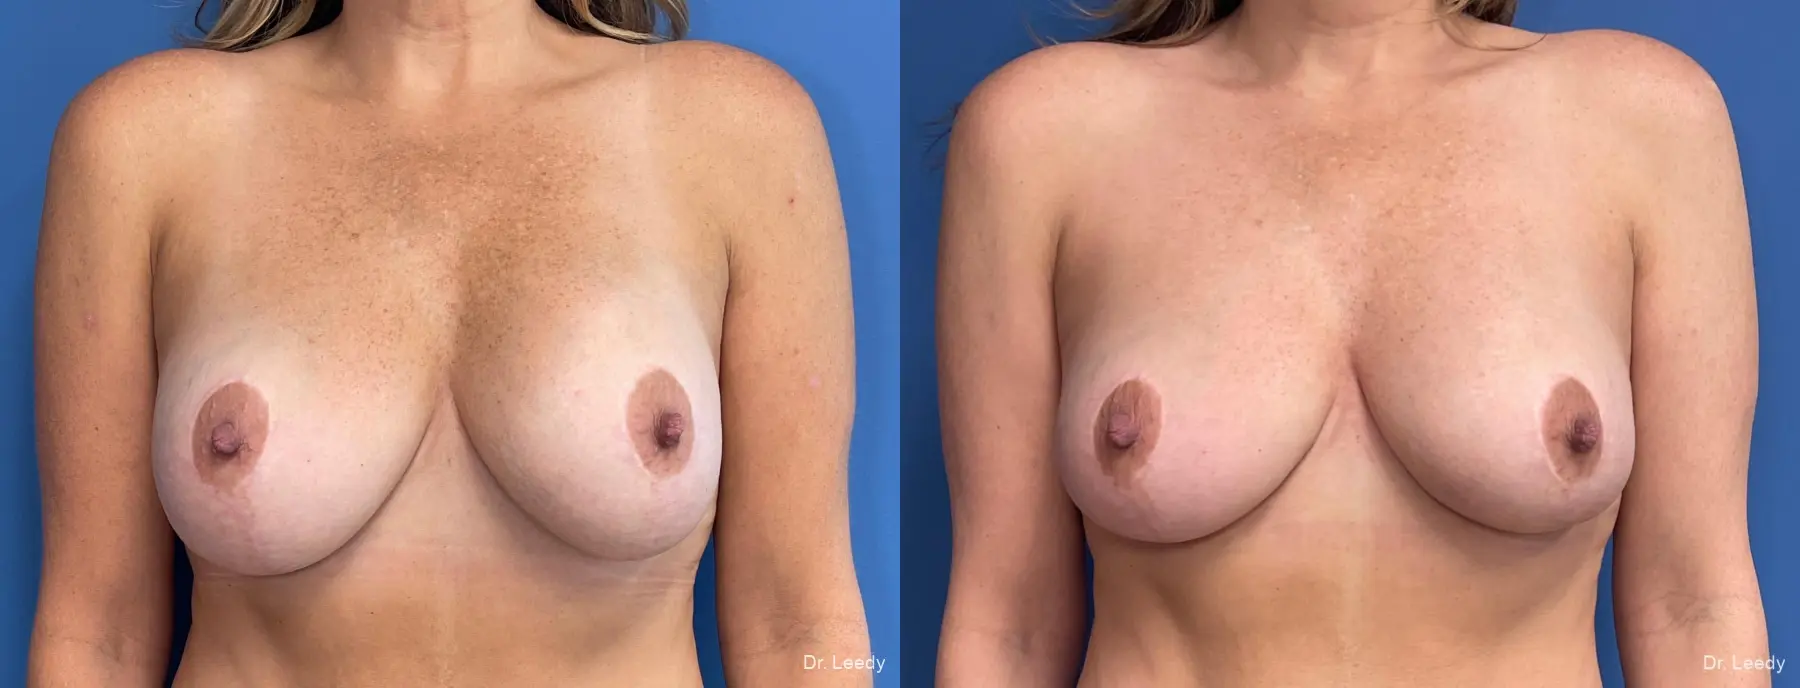 Breast Implant Exchange: Patient 5 - Before and After 1